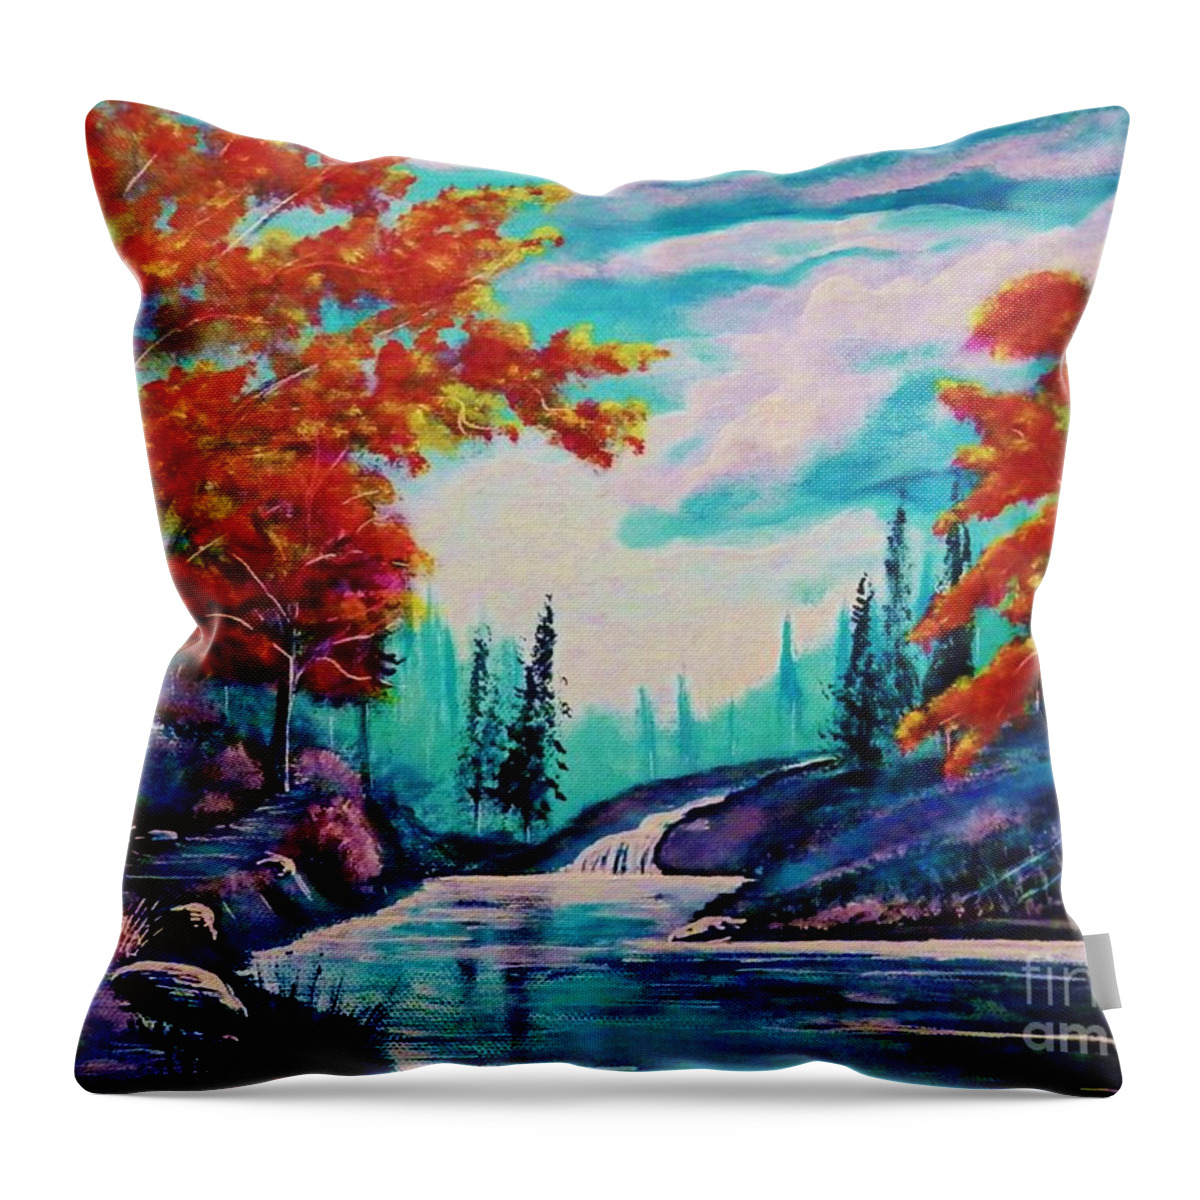 Along The Throw Pillow featuring the painting Dream Along The Riverside by Mario Lorenz